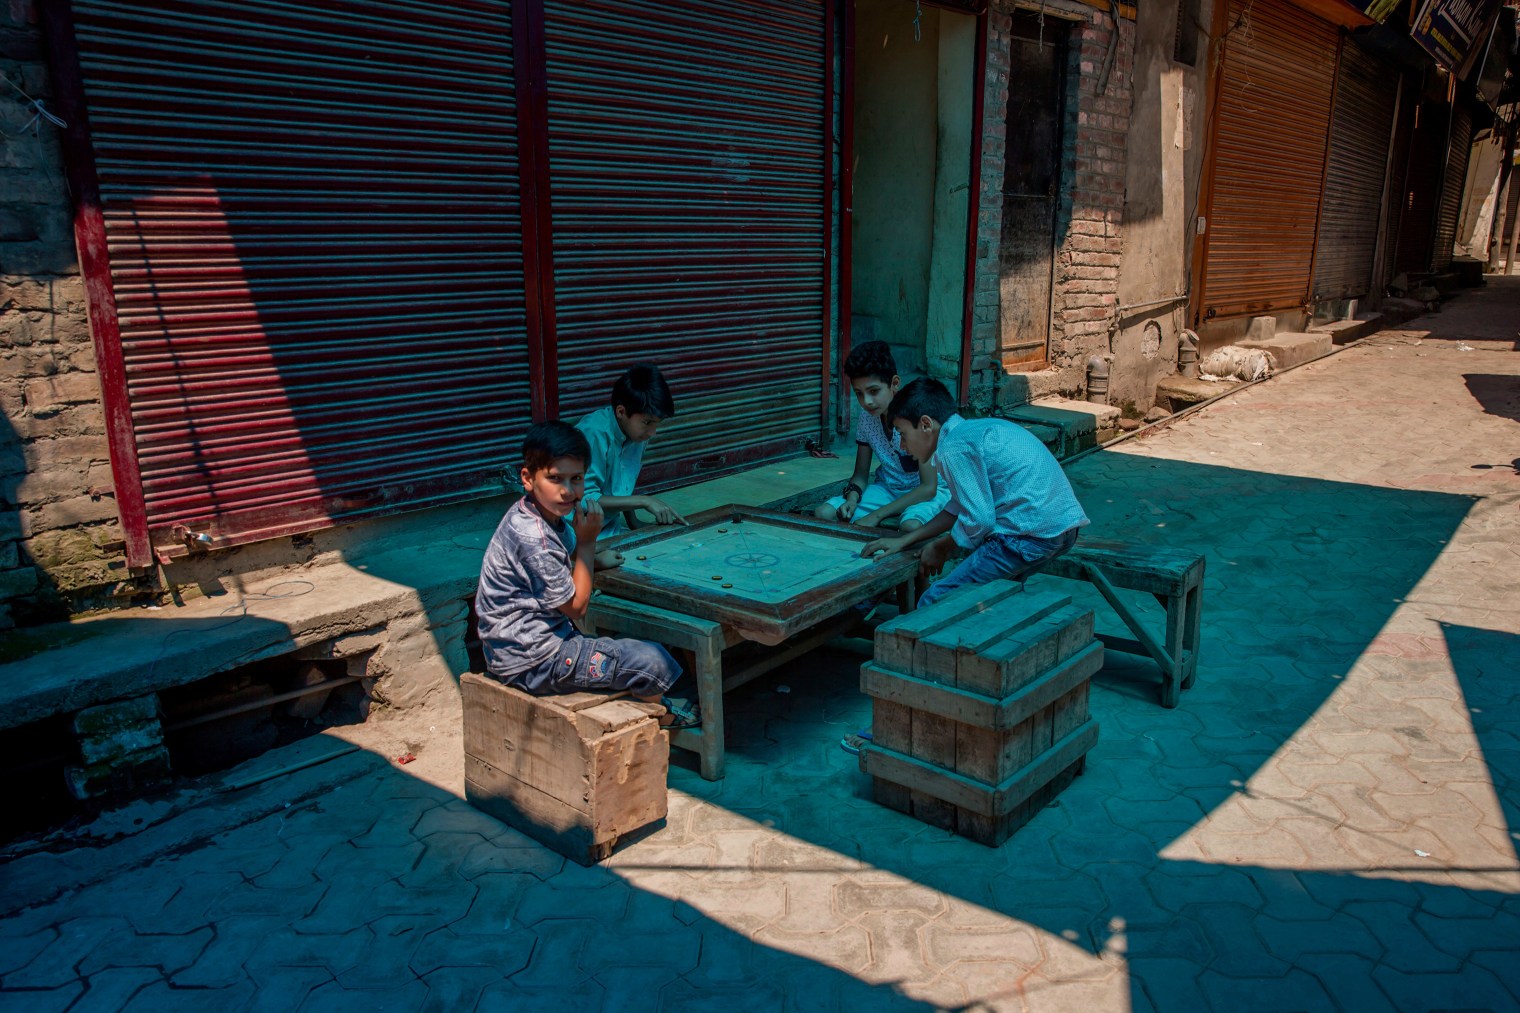 Boys play caromboard on a road outside during a strike in Srinagar on June 9, 2017. Parts of Indian-controlled Kashmir remained under curfew Friday, while general strikes were being staged in other areas after Kashmiri separatists called for strike to protest the Tuesday killing of a civilian by government forces during a search operation to flush out Kashmiri rebels in the southern town of Indian controlled Kashmir.